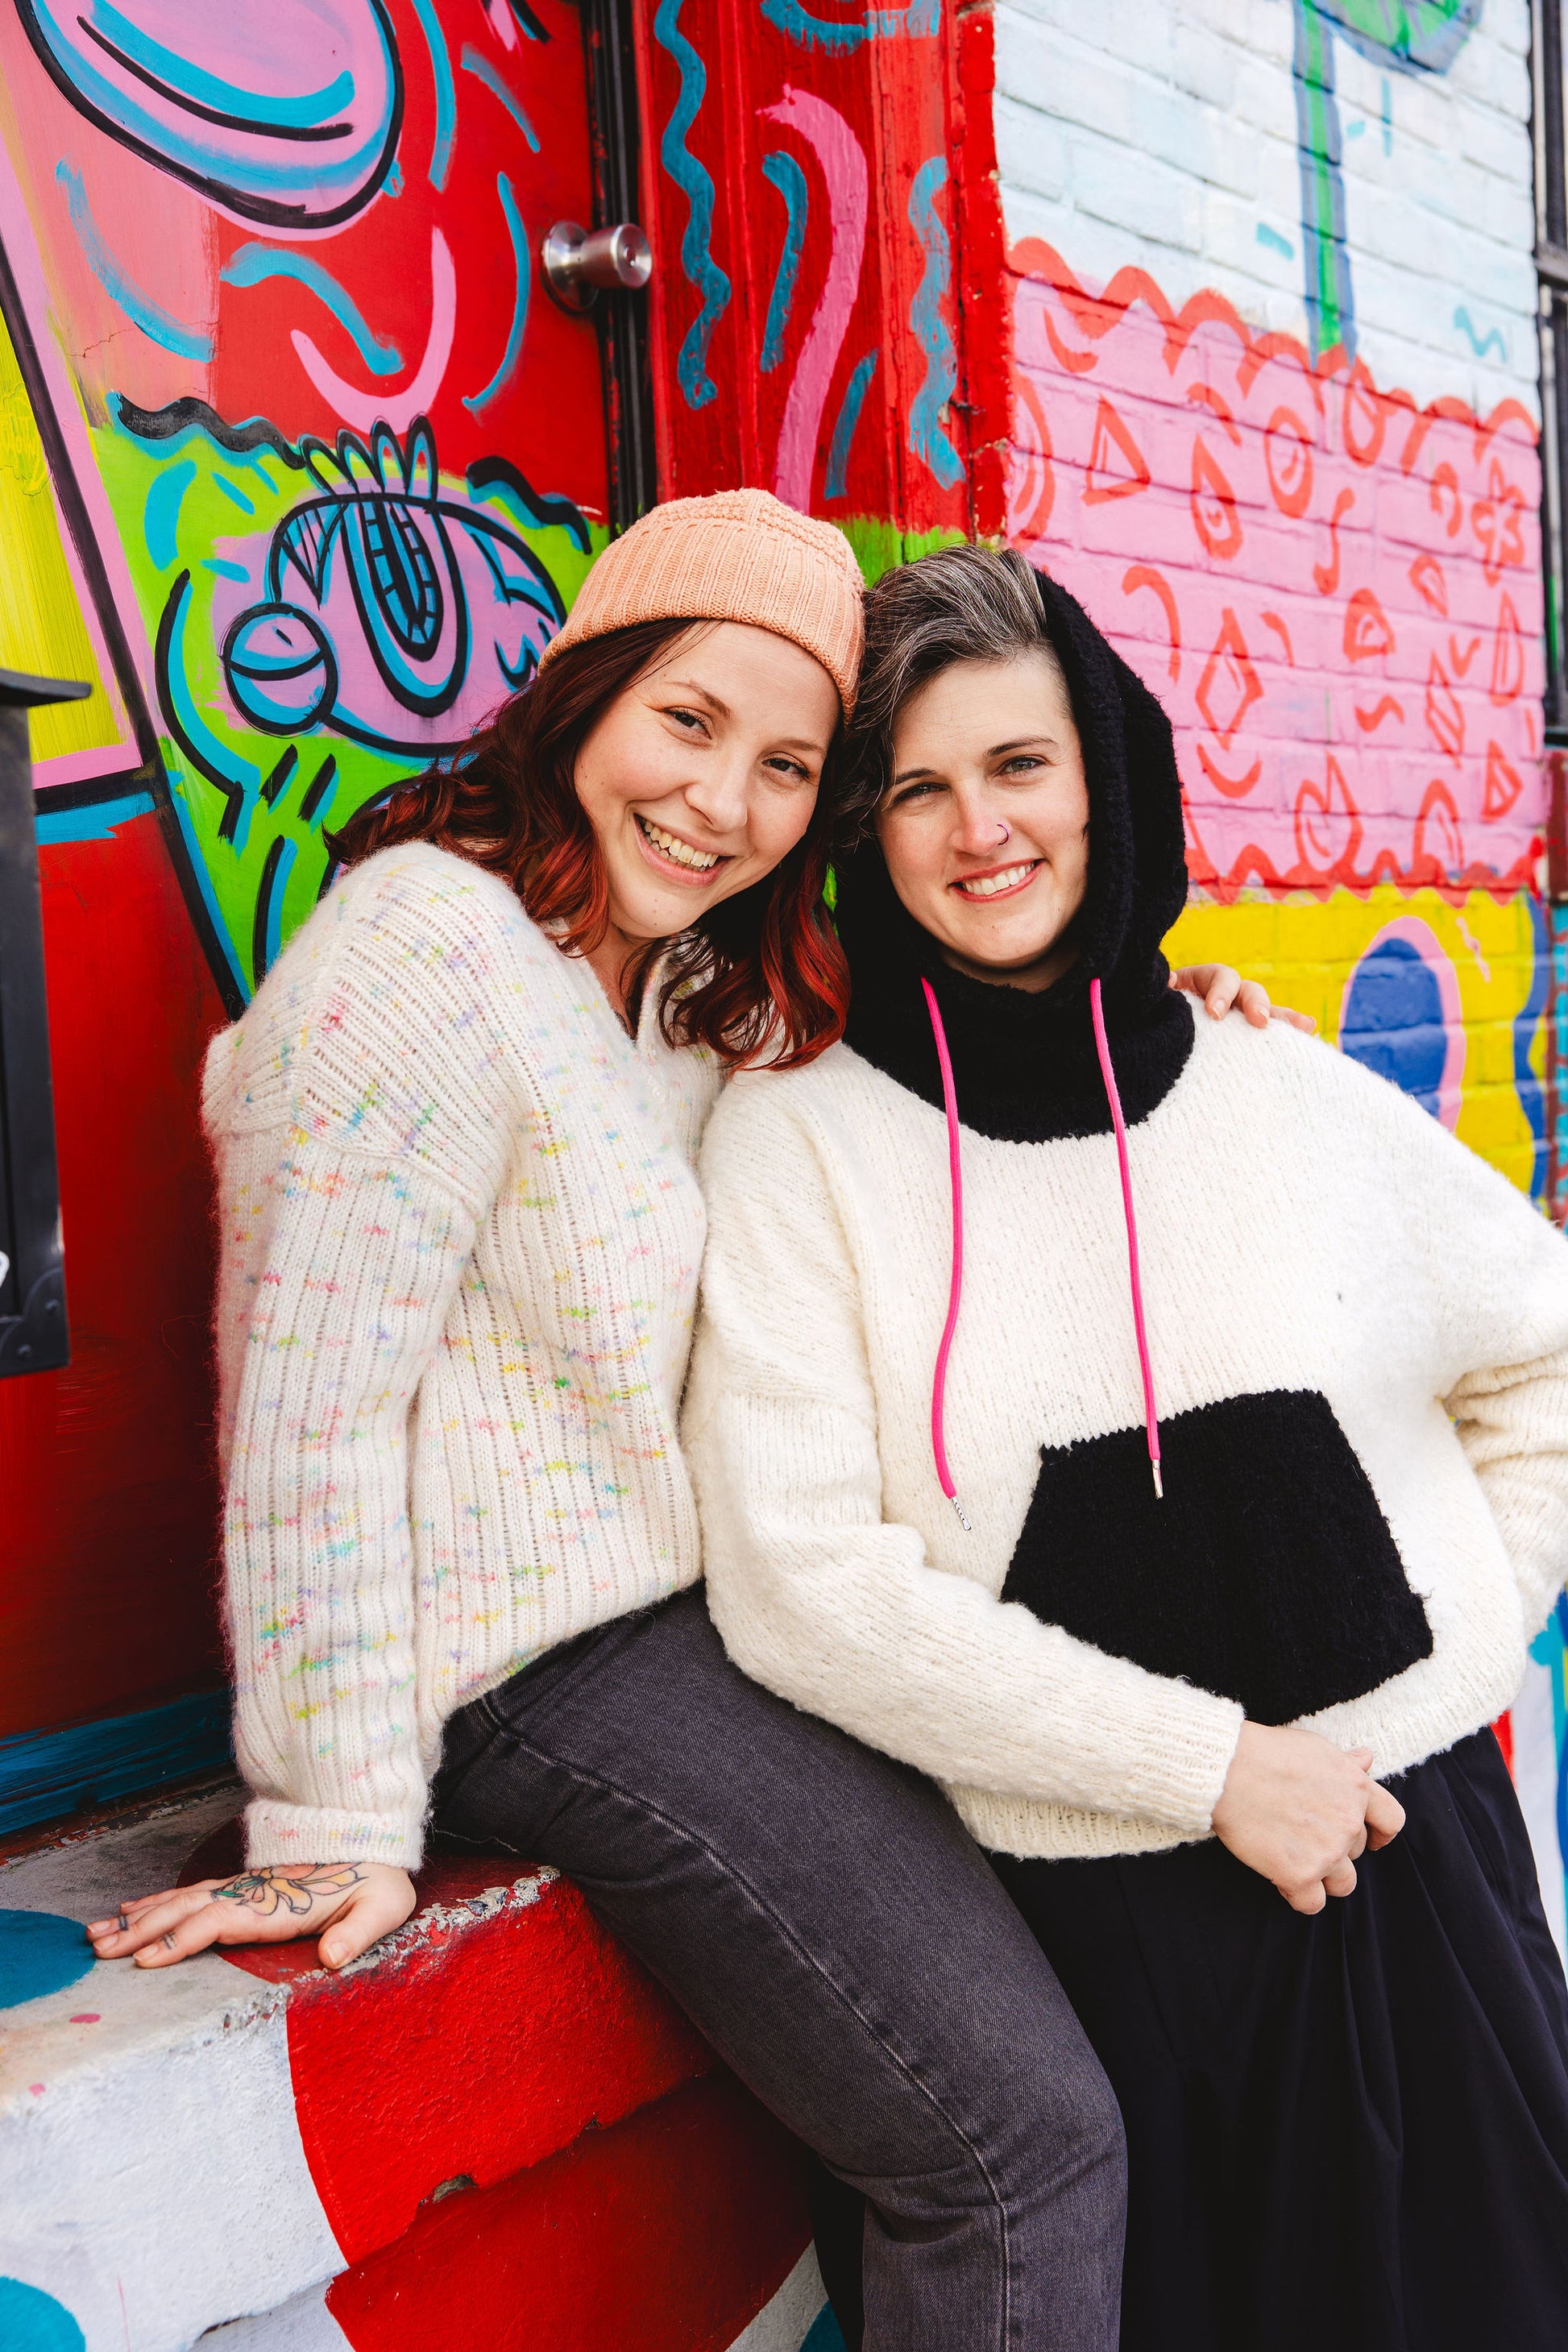 Jen and Bess stand next to an outdoor mural. They are both grinning, and lean together with their heads touching. They both wear soft, fluffy drop shoulder knits.